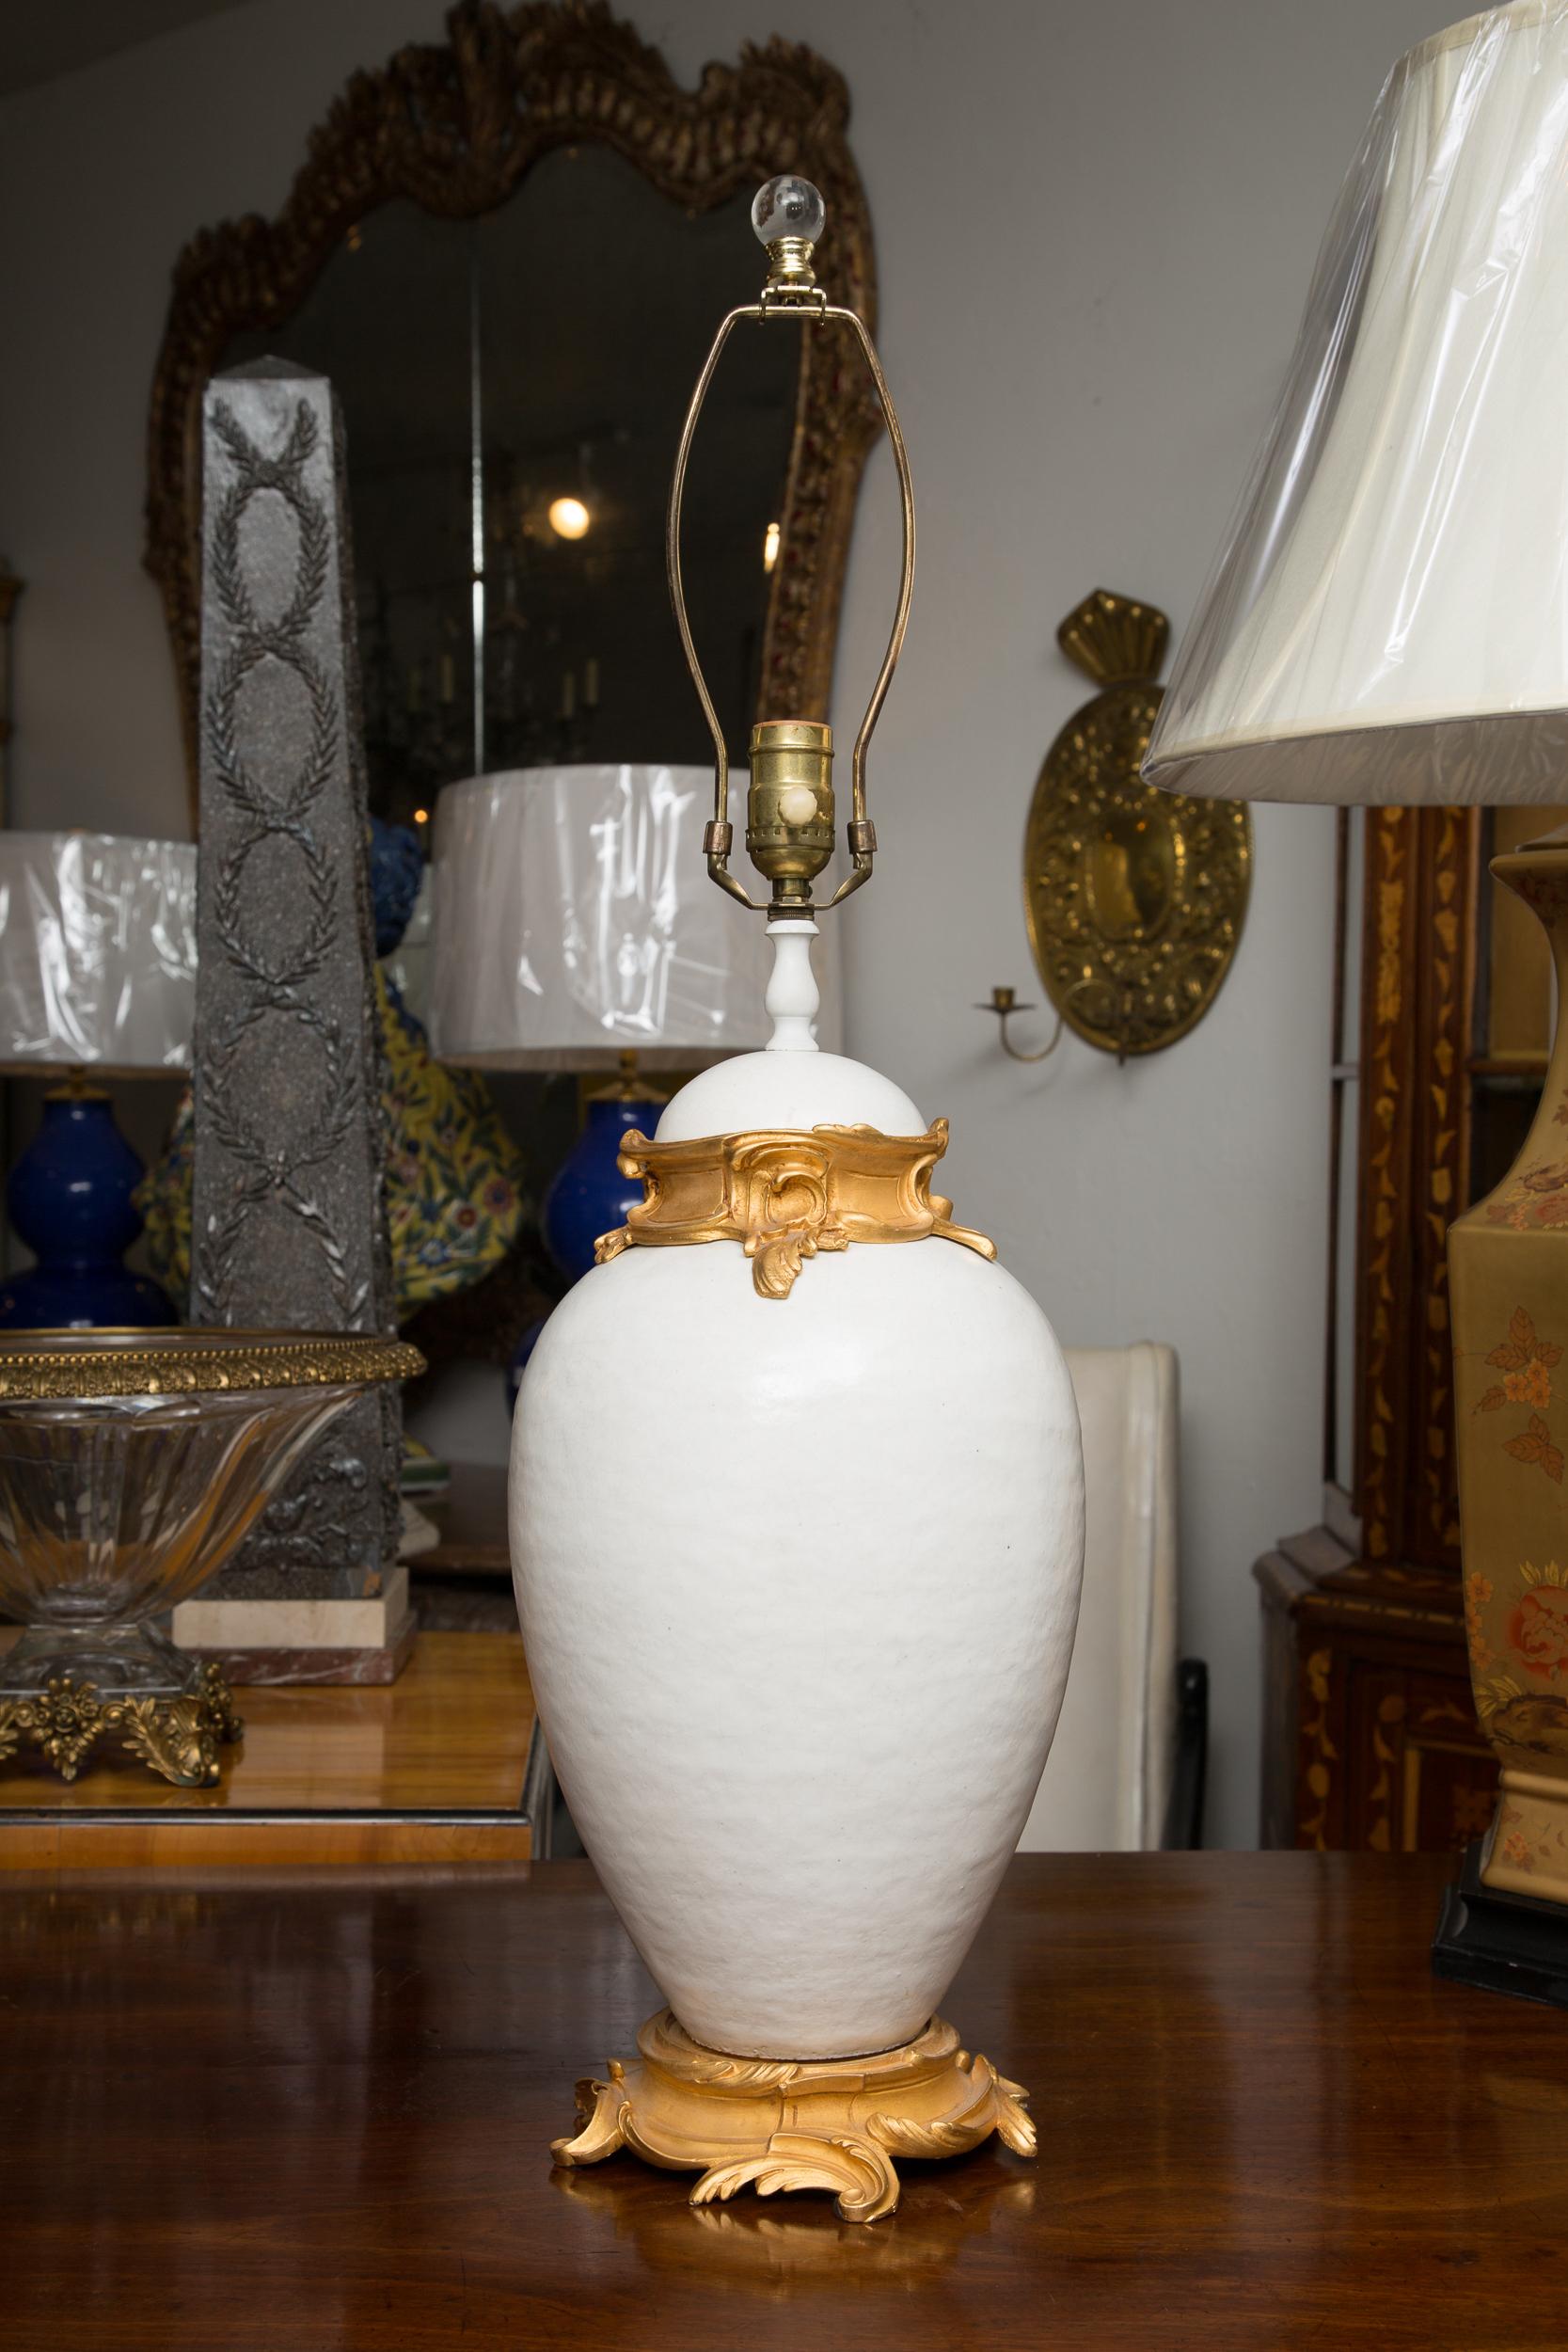 This is a sophisticated pair of white glazed ceramic lamps with gilt bronze mounts, creating a marriage of casual and formal.